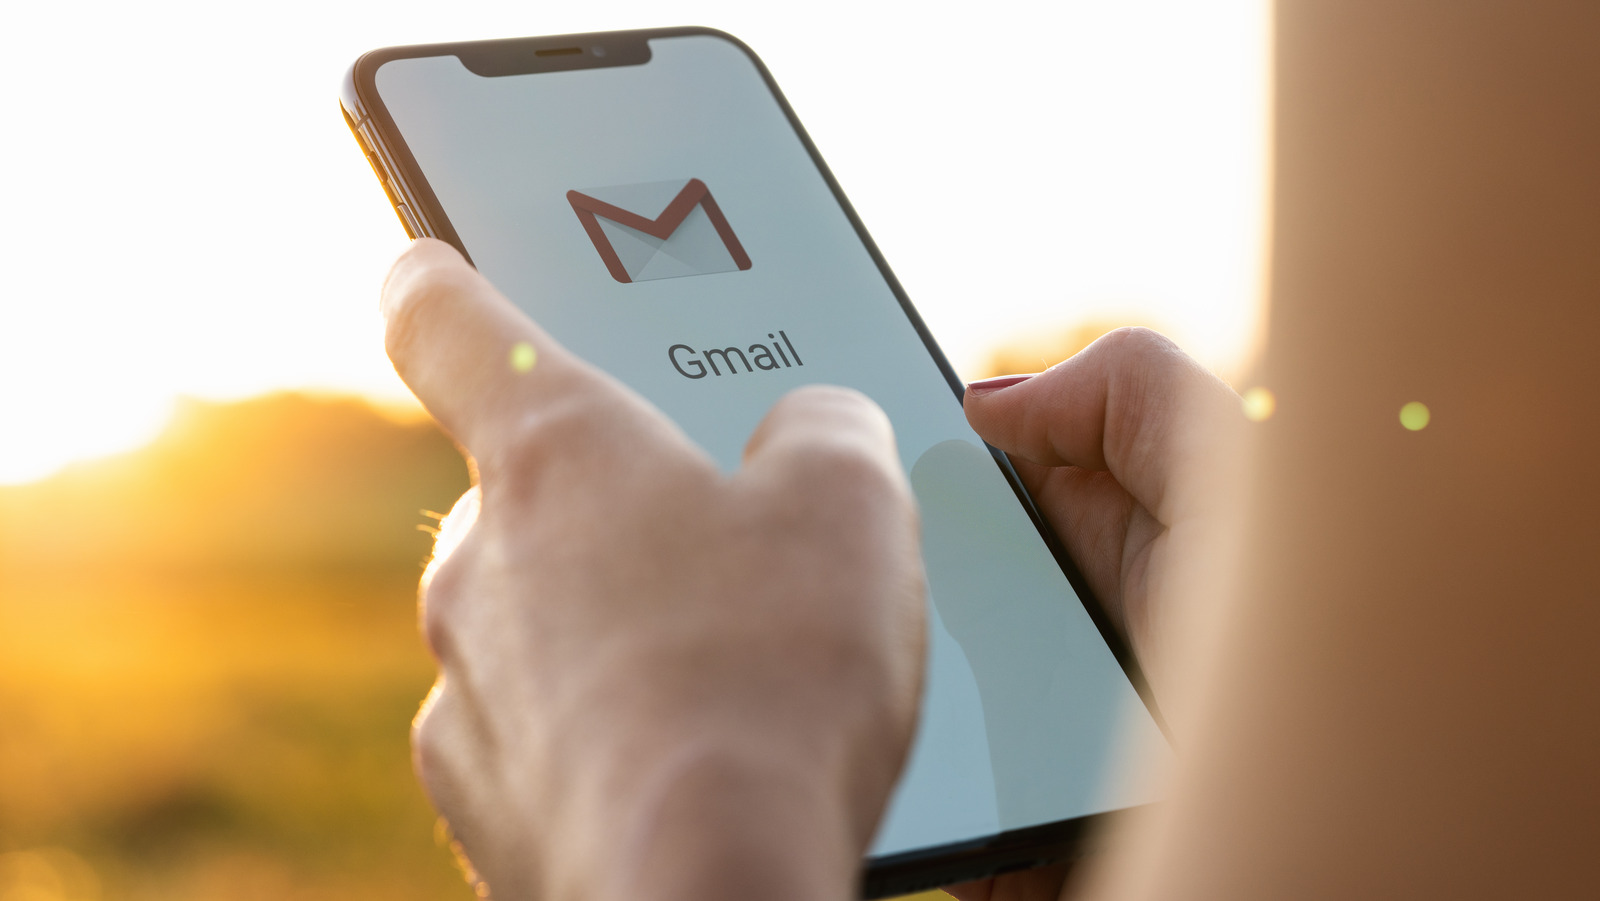 a-new-gmail-is-here-and-you-re-going-to-see-some-big-changes